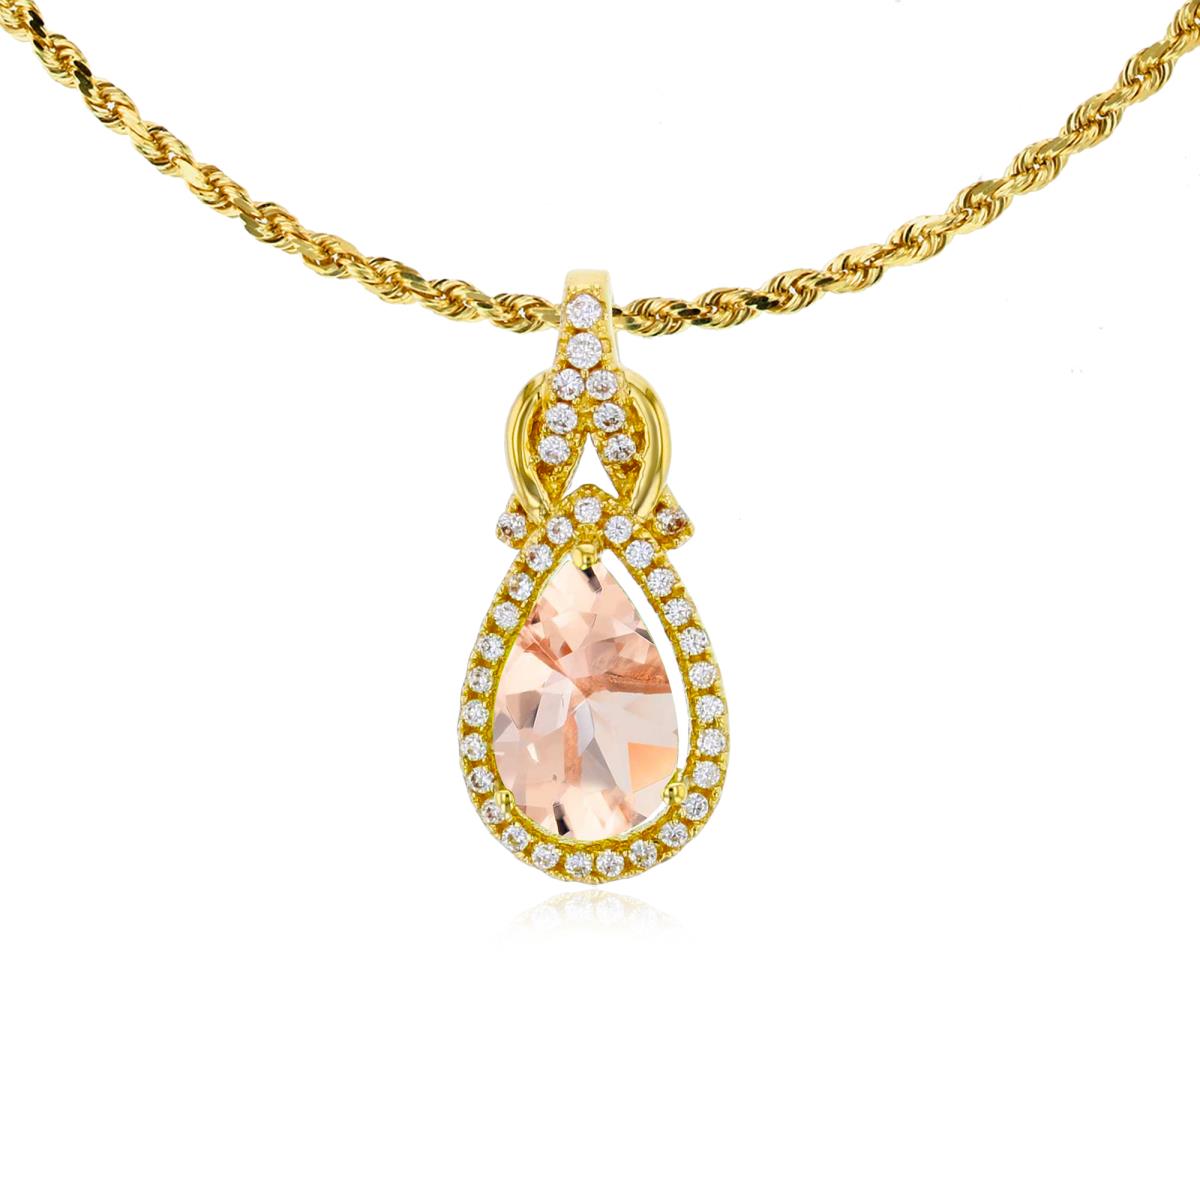 14K Yellow Gold 8x5mm Pear Cut Morganite & 0.11 CTTW Rnd Diamond Knot 18" Rope Chain Necklace